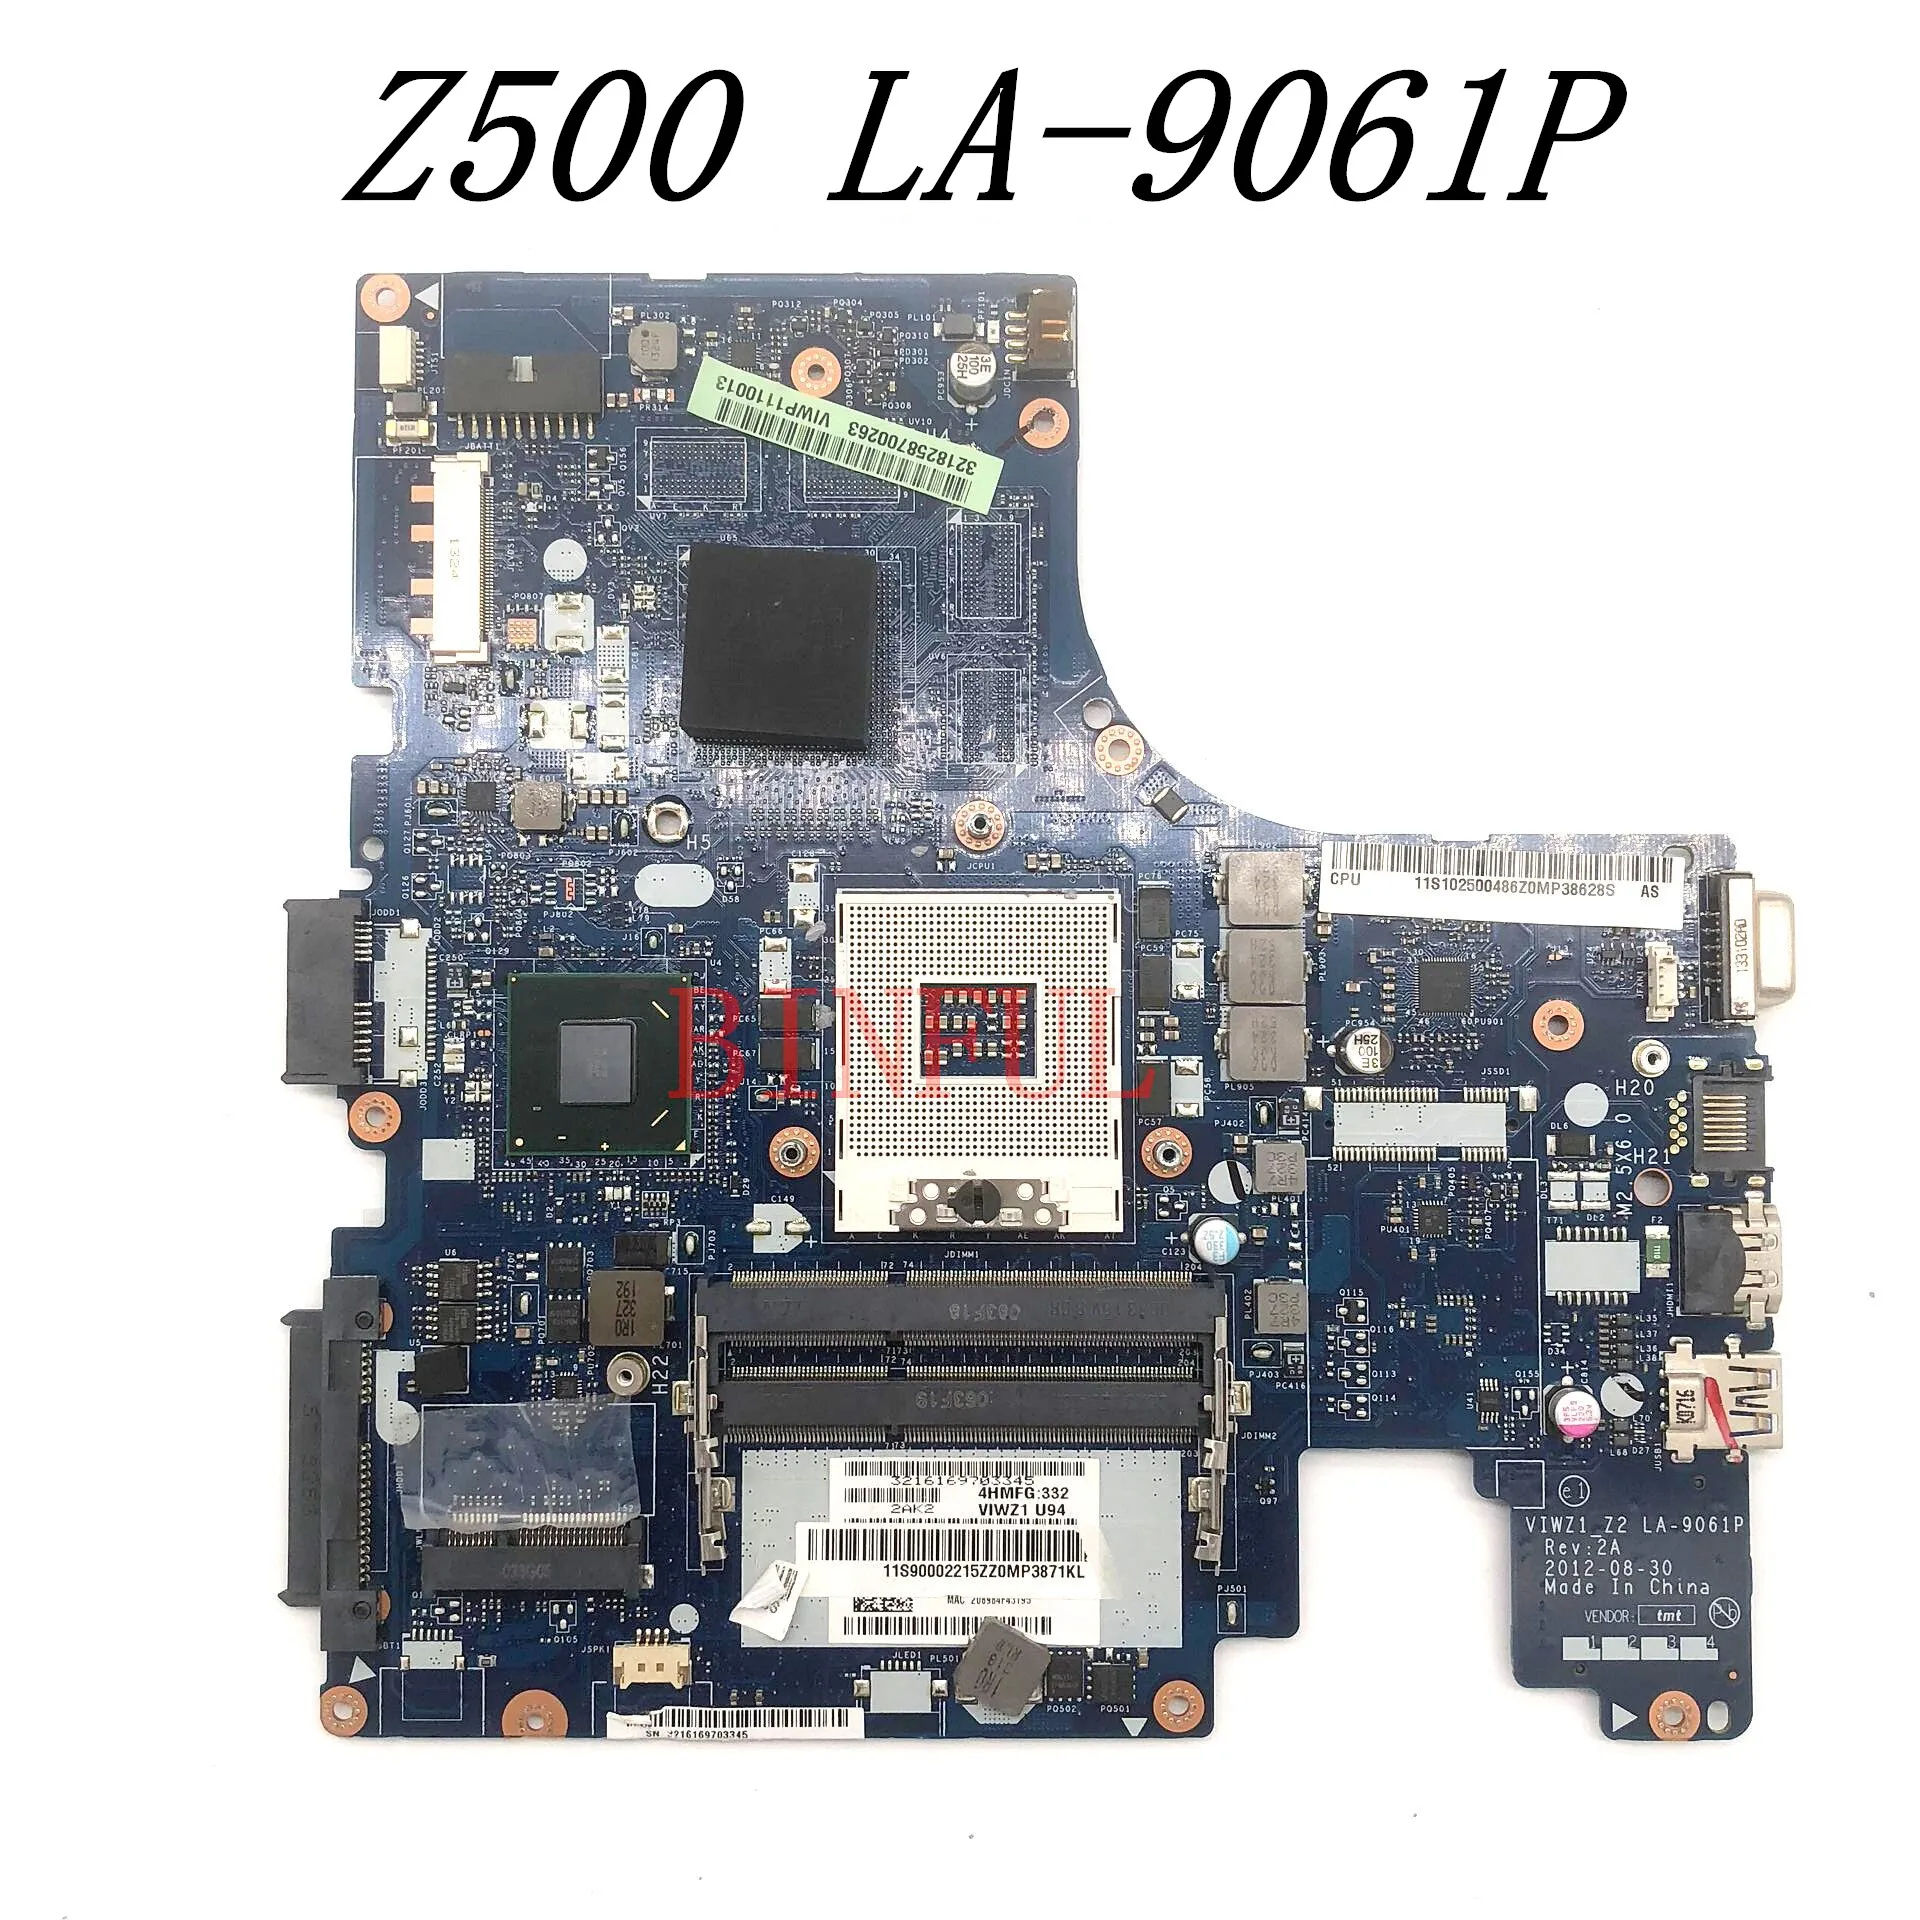 VIW21_Z2 LA-9061P Free Shipping High Quality Mainboard For Z500 Z400 Laptop Motherboard 2G HM76 DDR3 100% Full Working Well